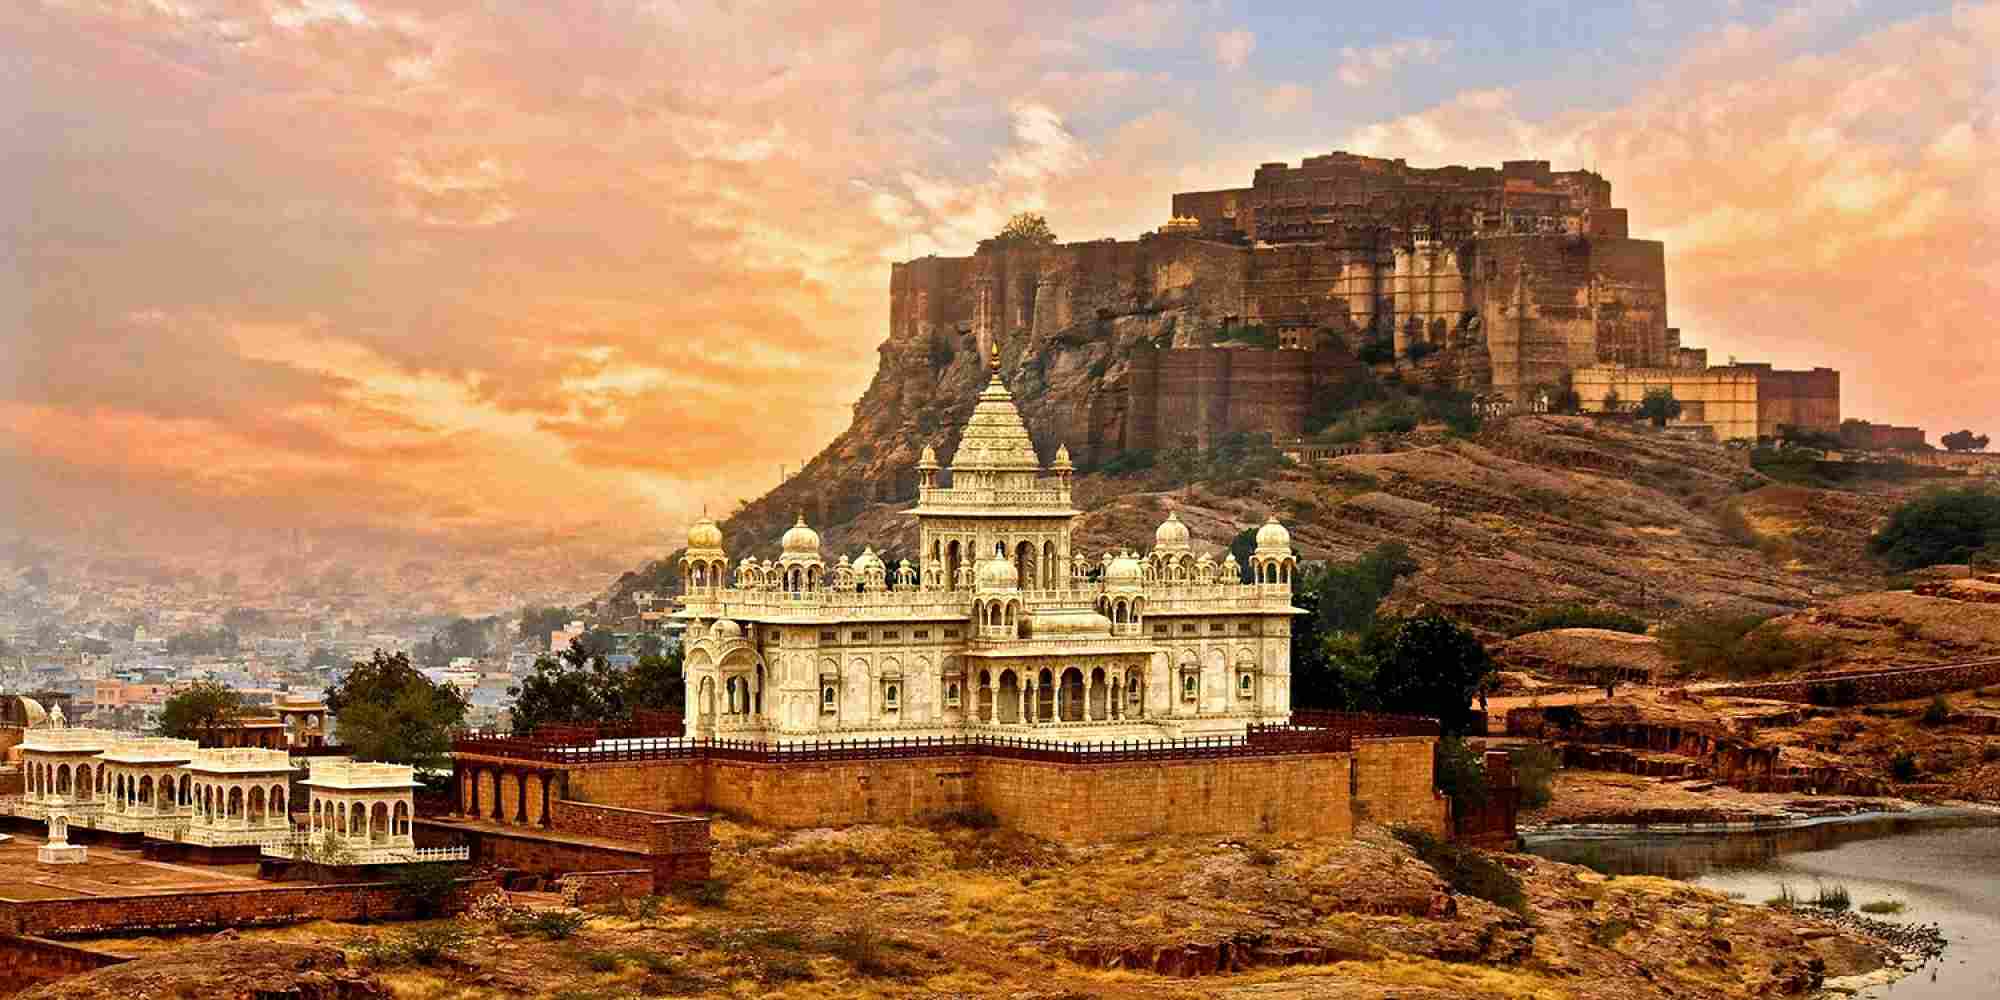 Jodhpur The Heritage City Of Rajasthan Travel Guide The Indian Wire Riset